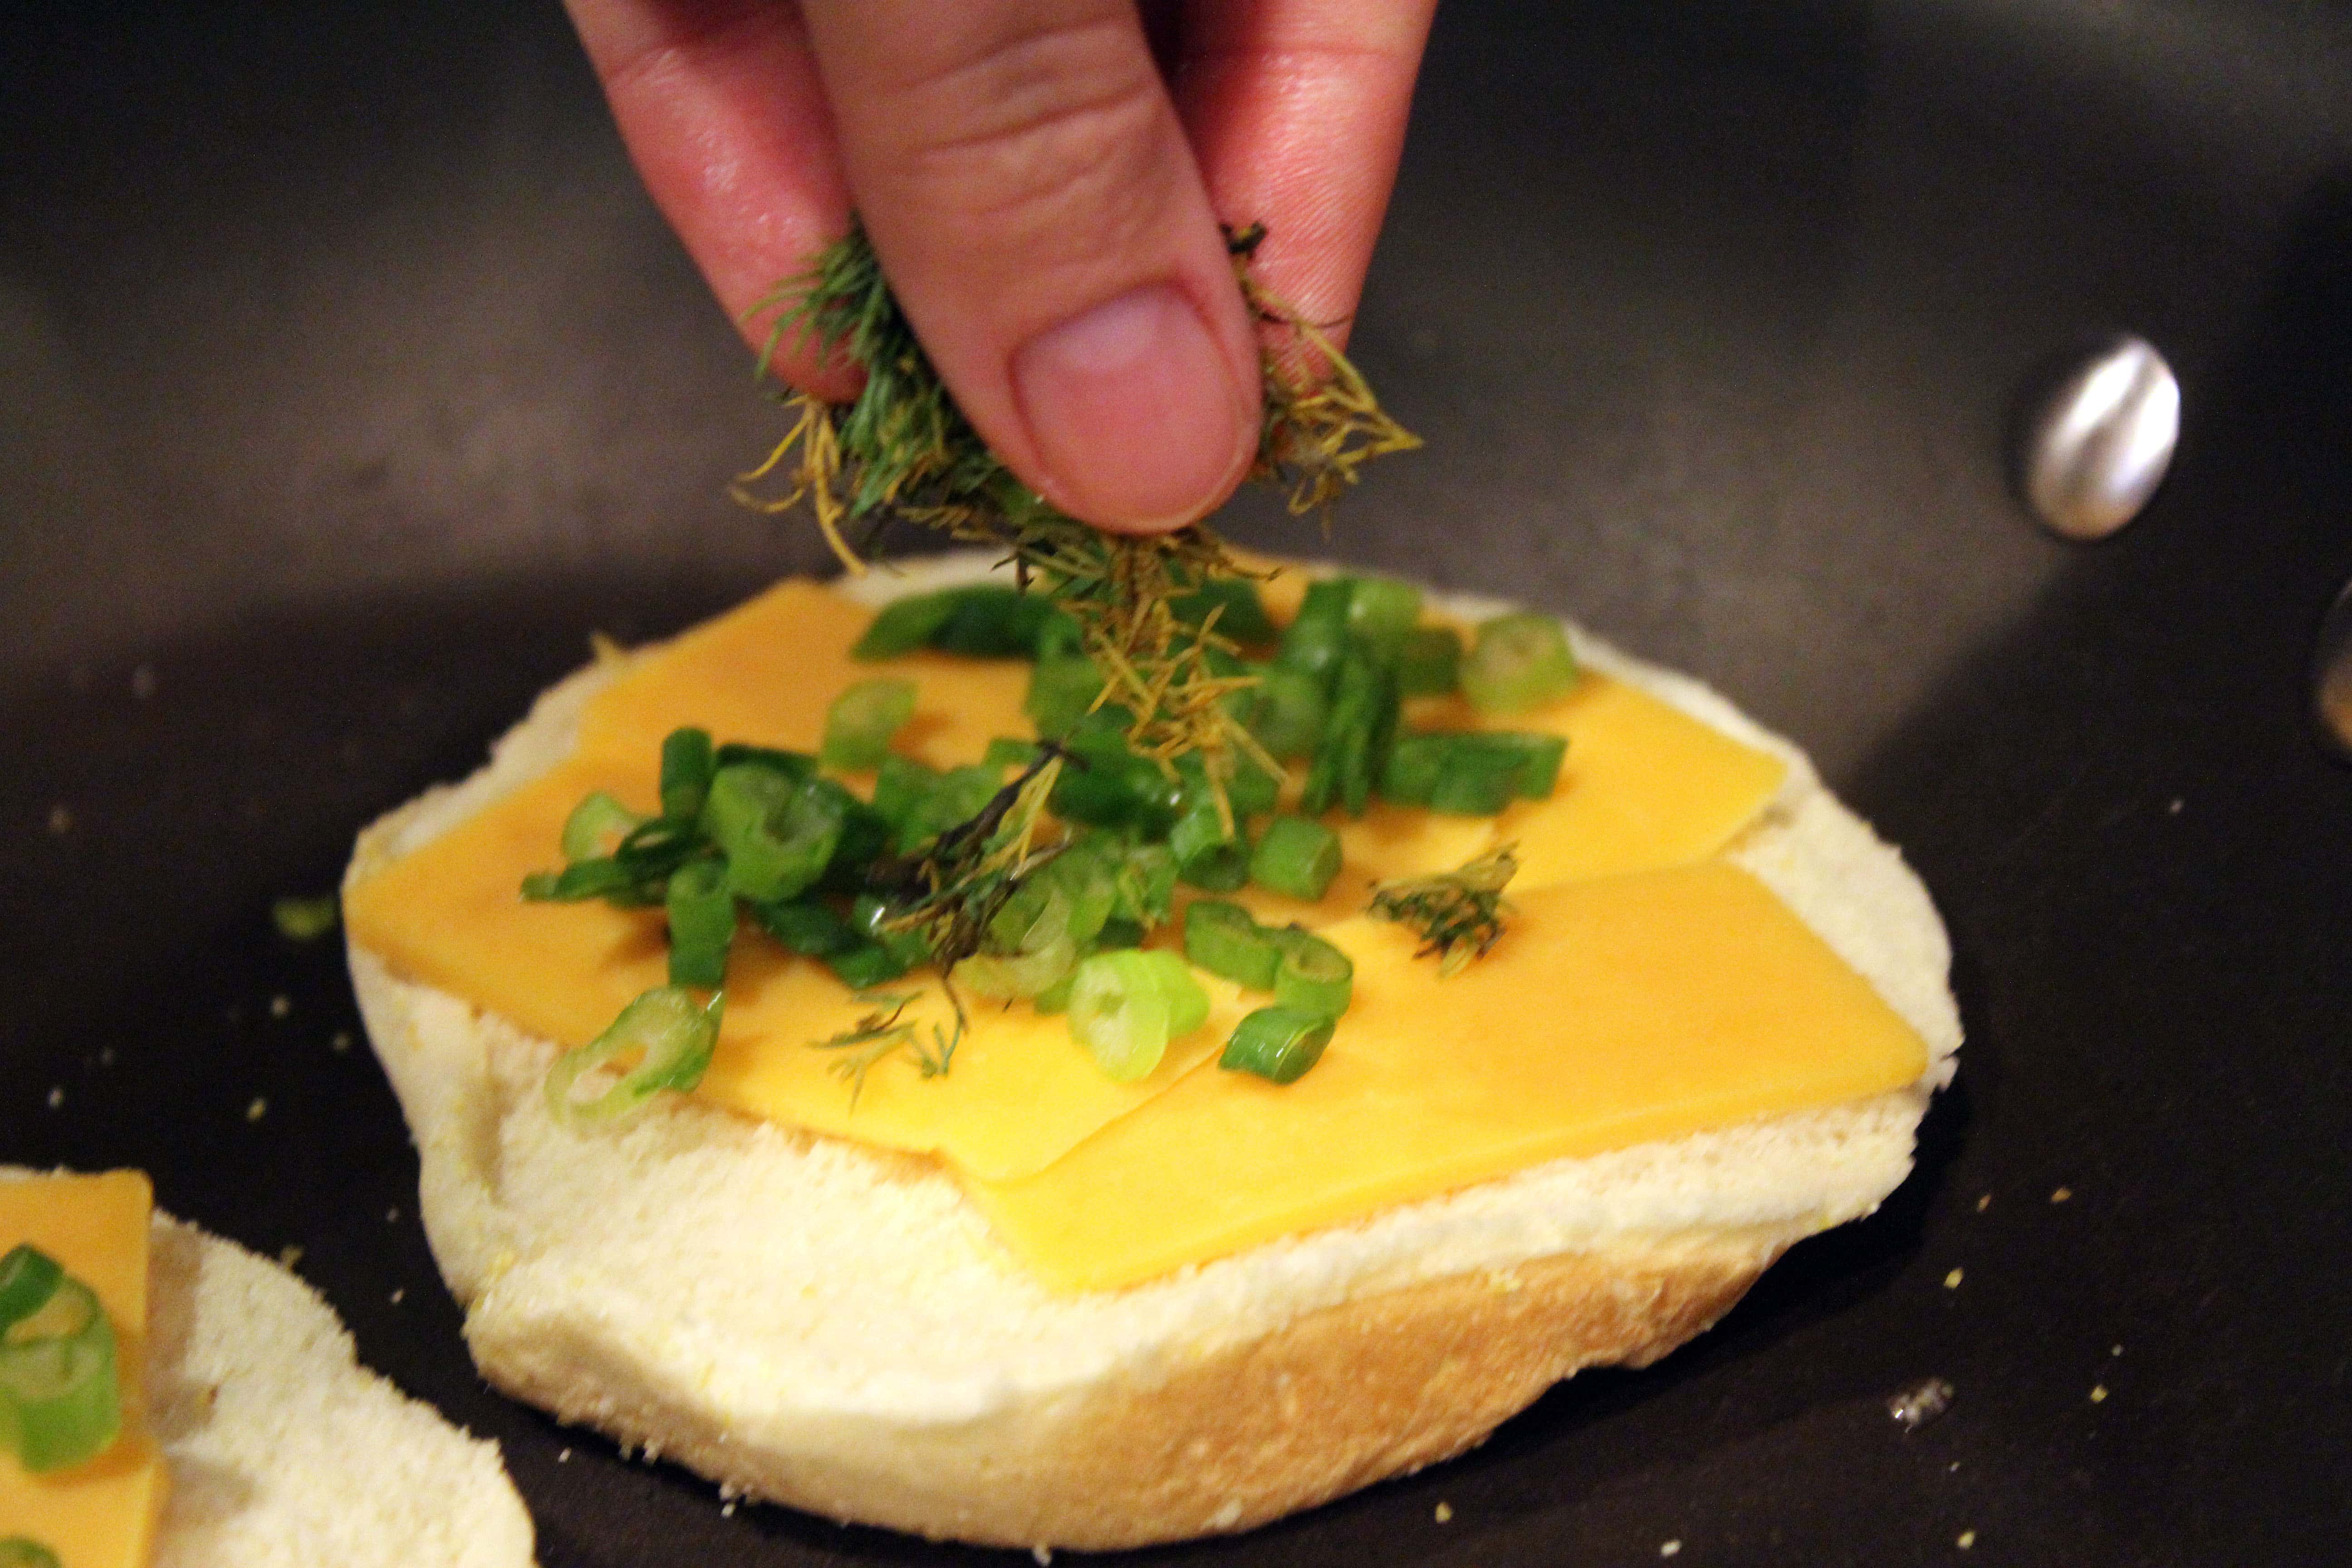 Add dill and scallions to bottom layer of cheese